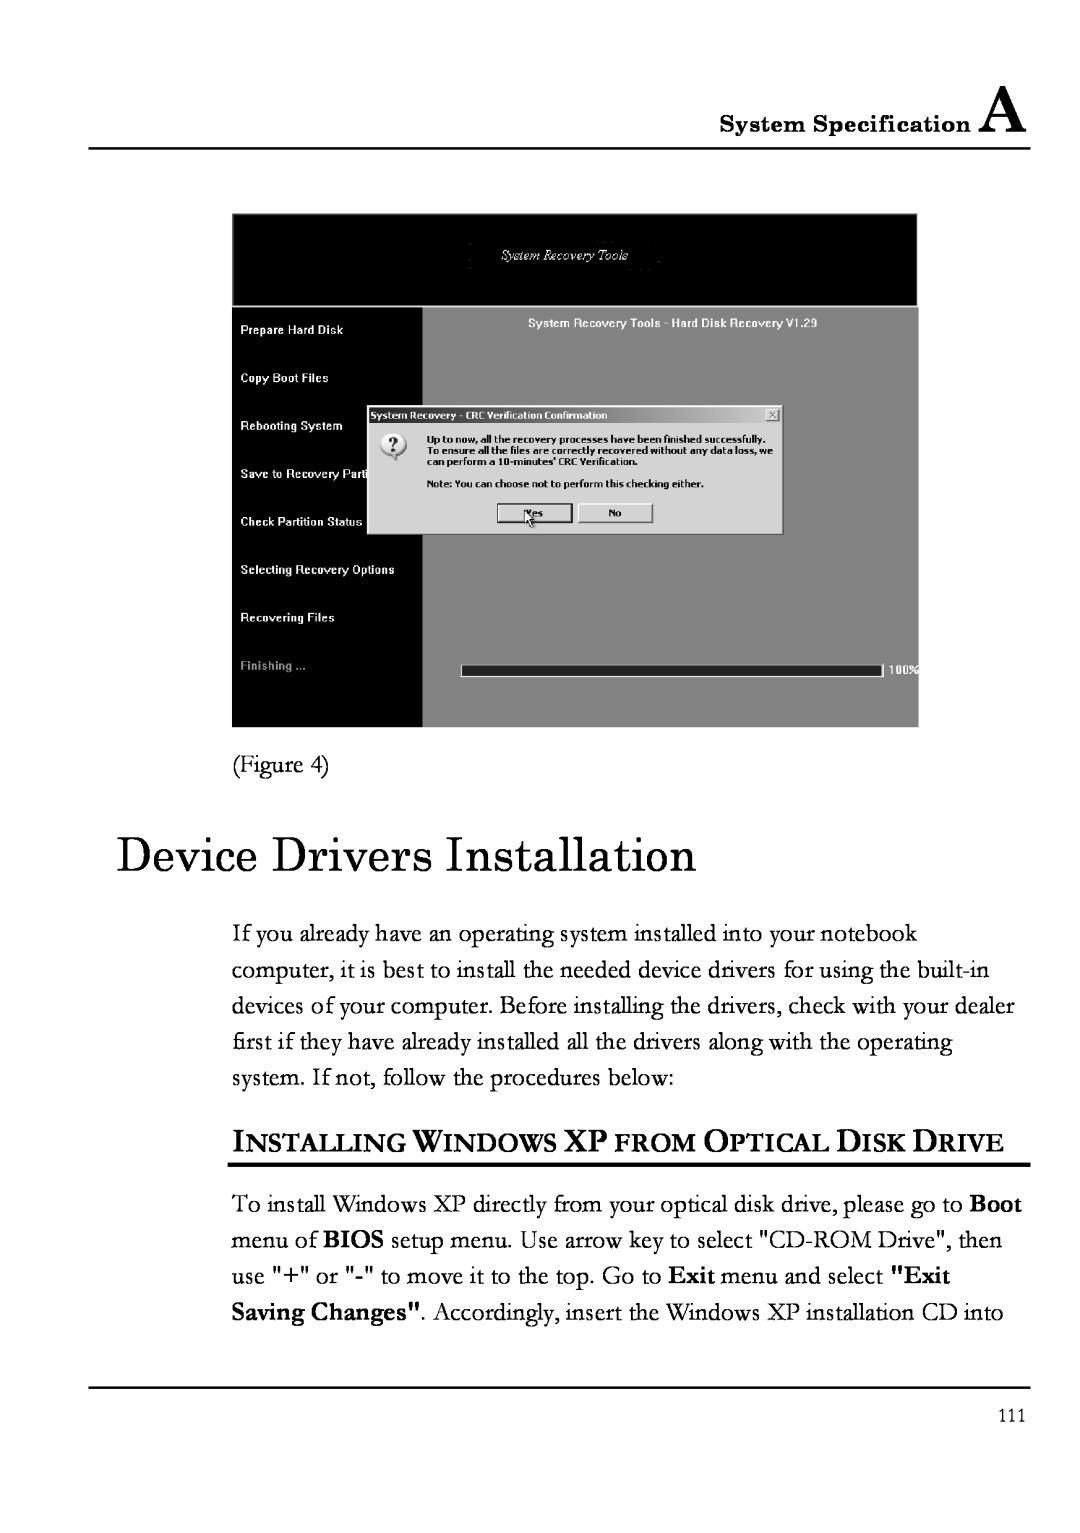 Everex NM3900W, NM4100W, NM3700W, NM3500W manual Device Drivers Installation, Installing Windows Xp From Optical Disk Drive 